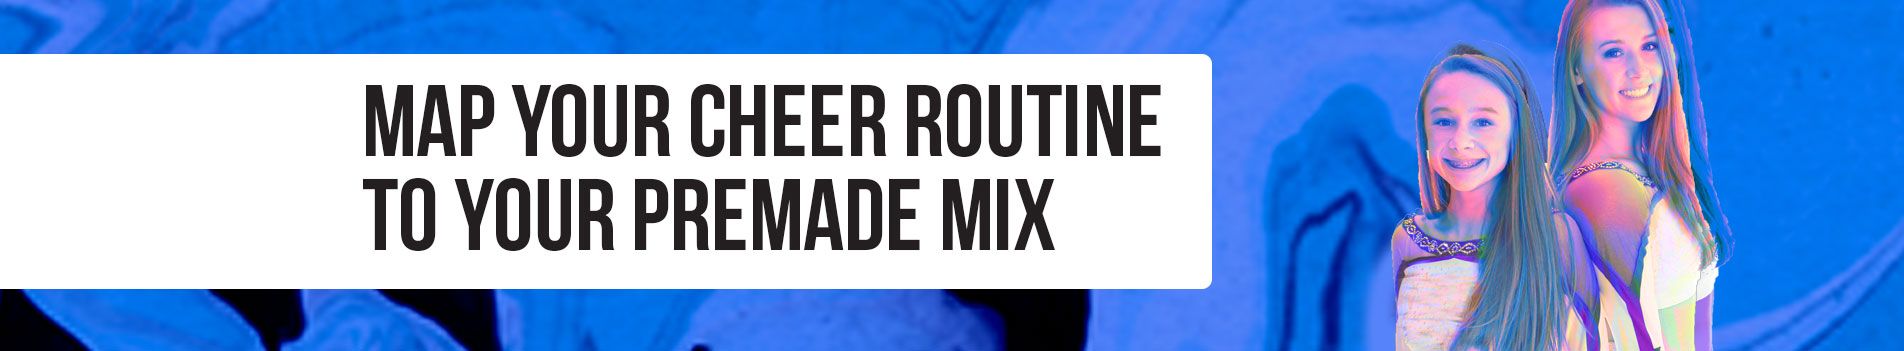 Map your cheer routine to your premade mix